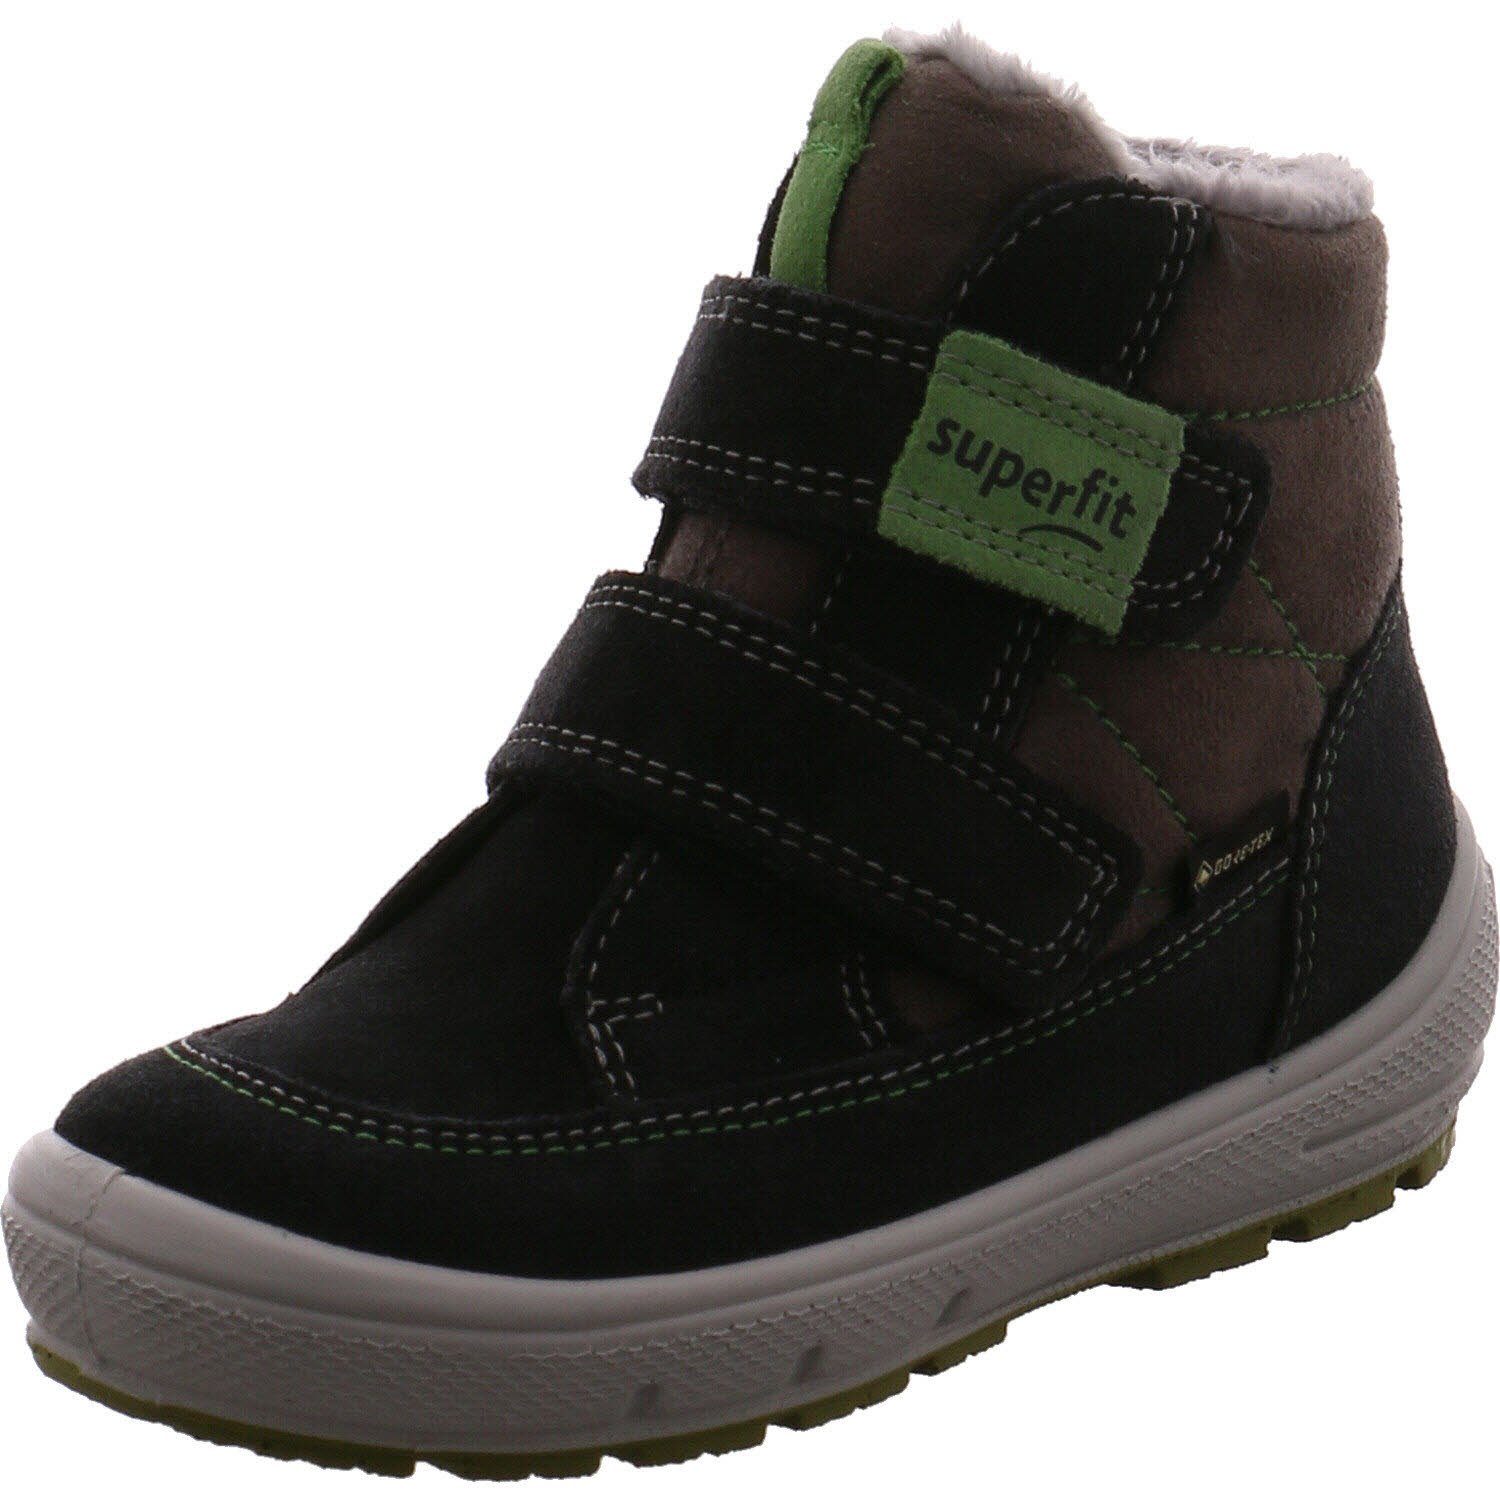 Groovy Superfit Stiefel